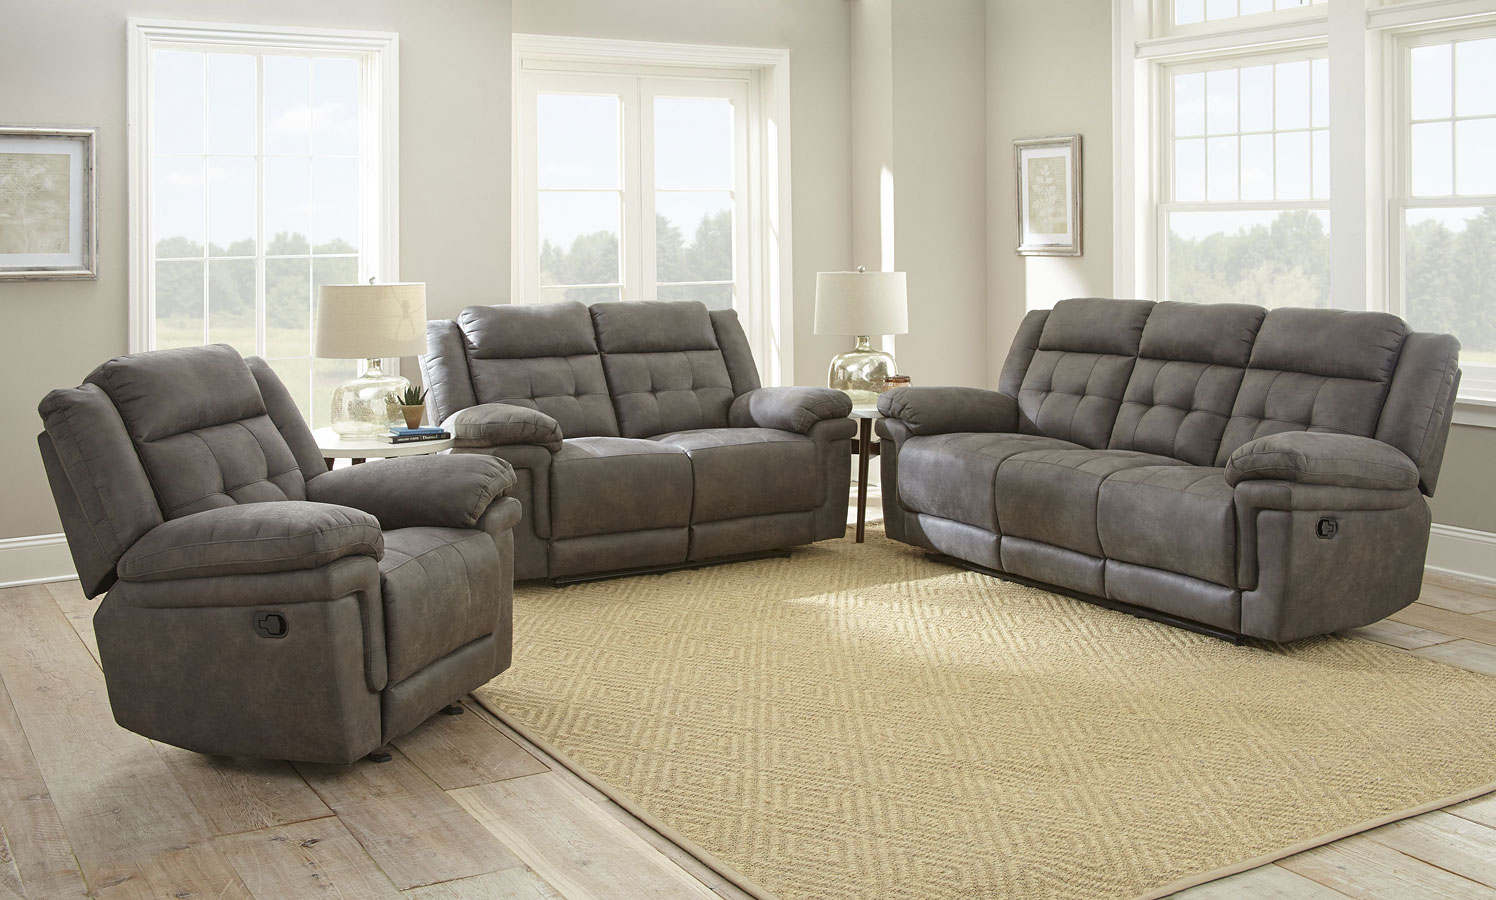 Reclining Living Room Sets For Sale